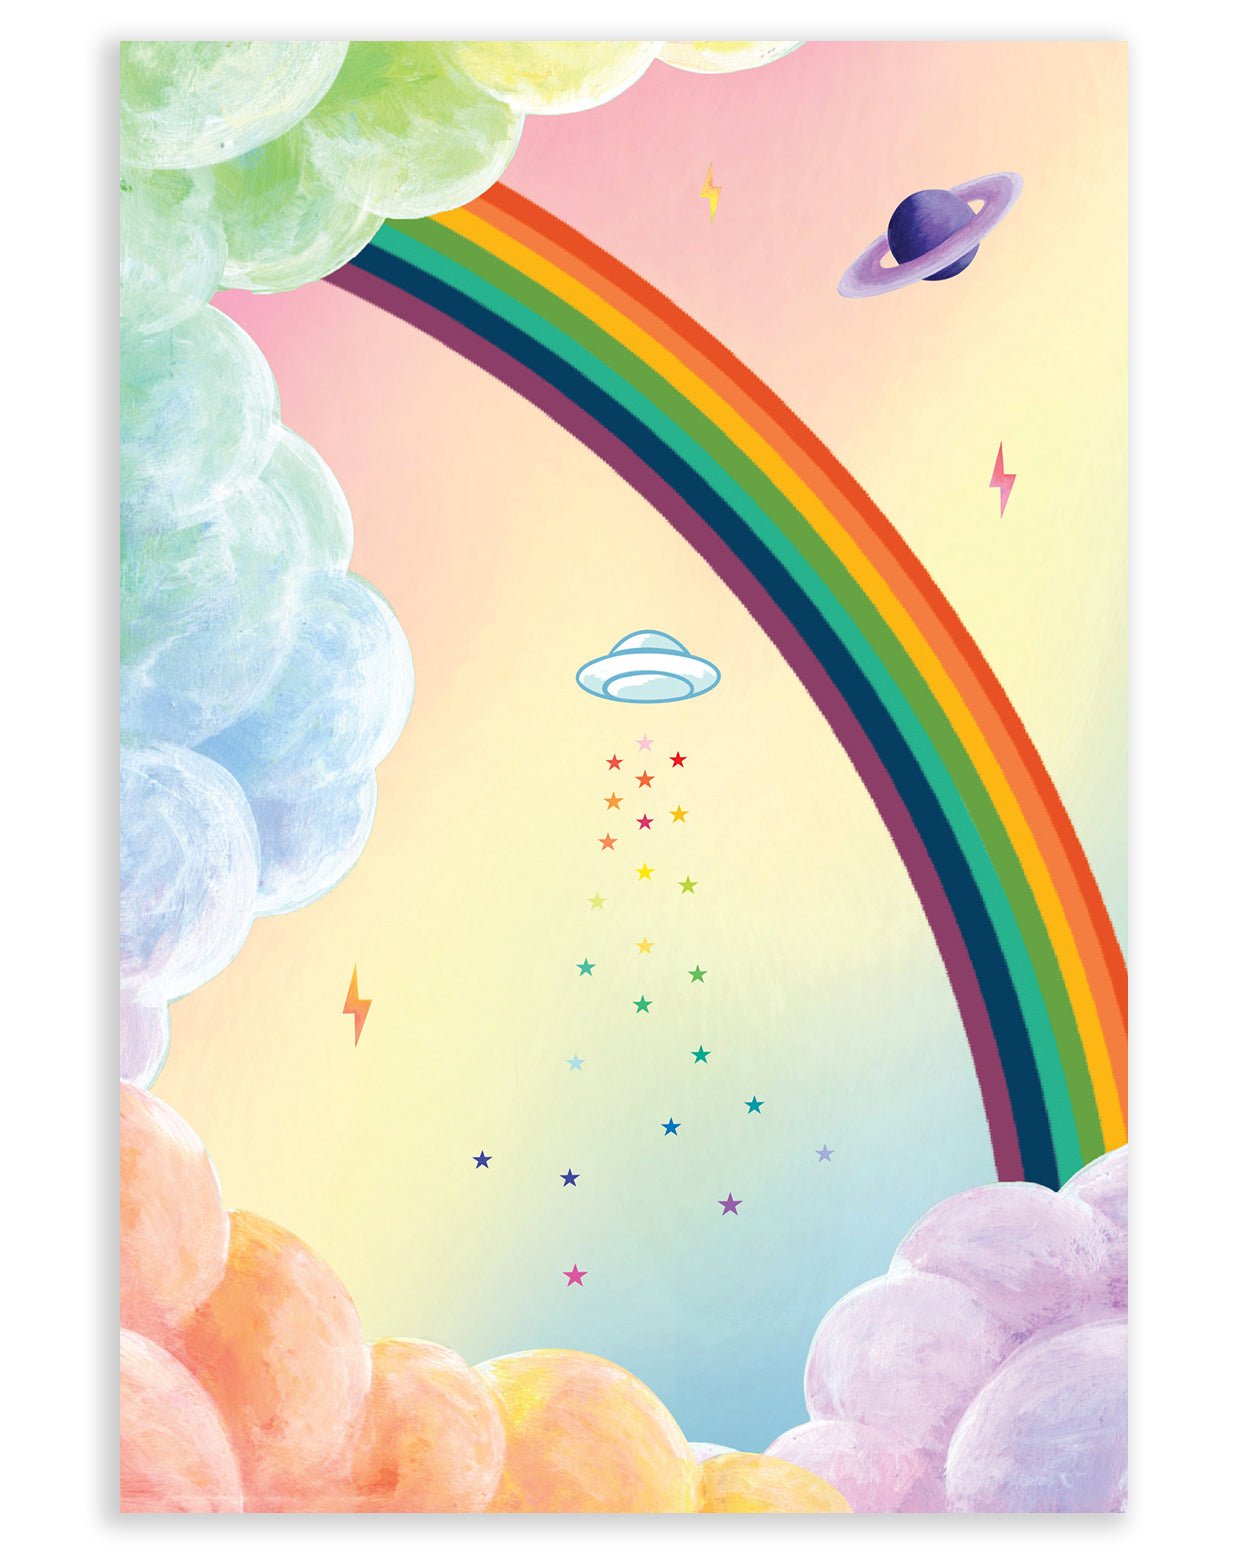 Rainbow clouds surrounding a rainbow centerpiece, Saturn, lightning, a UFO with rainbow stars coming out from below it with pink, yellow and blue gradient printed on cardstock against a white background.